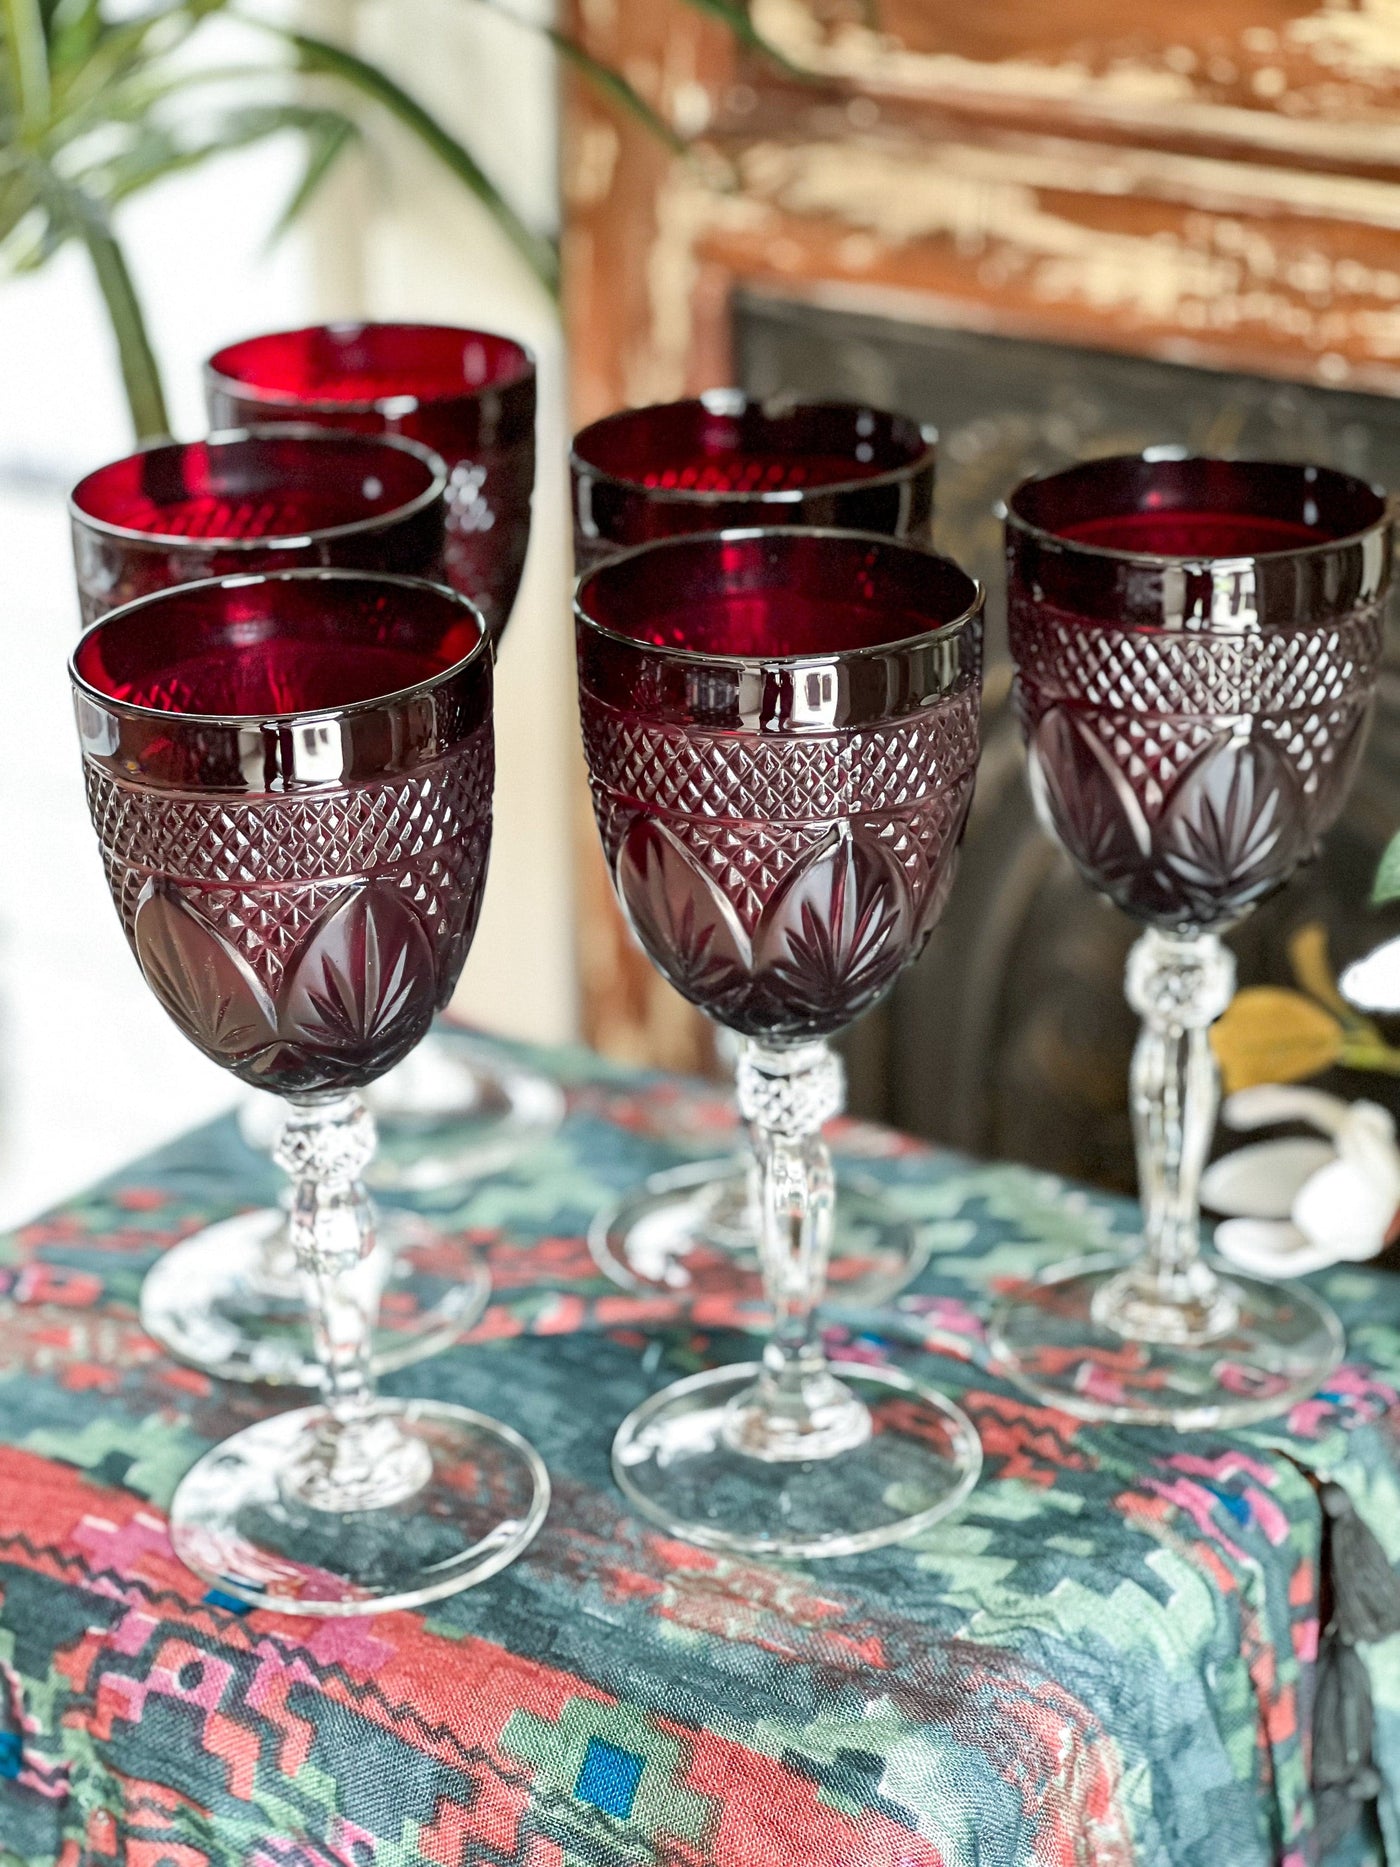 CUT CRYSTAL D'ARQUES DURAND RUBY RED WINE GLASSES SET OF 6 Revive In Style Vintage Furniture Painted Refinished Redesign Beautiful One of a Kind Artistic Antique Unique Home Decor Interior Design French Country Shabby Chic Cottage Farmhouse Grandmillenial Coastal Chalk Paint Metallic Glam Eclectic Quality Dovetailed Rustic Furniture Painter Pinterest Bedroom Living Room Entryway Kitchen Home Trends House Styles Decorating ideas